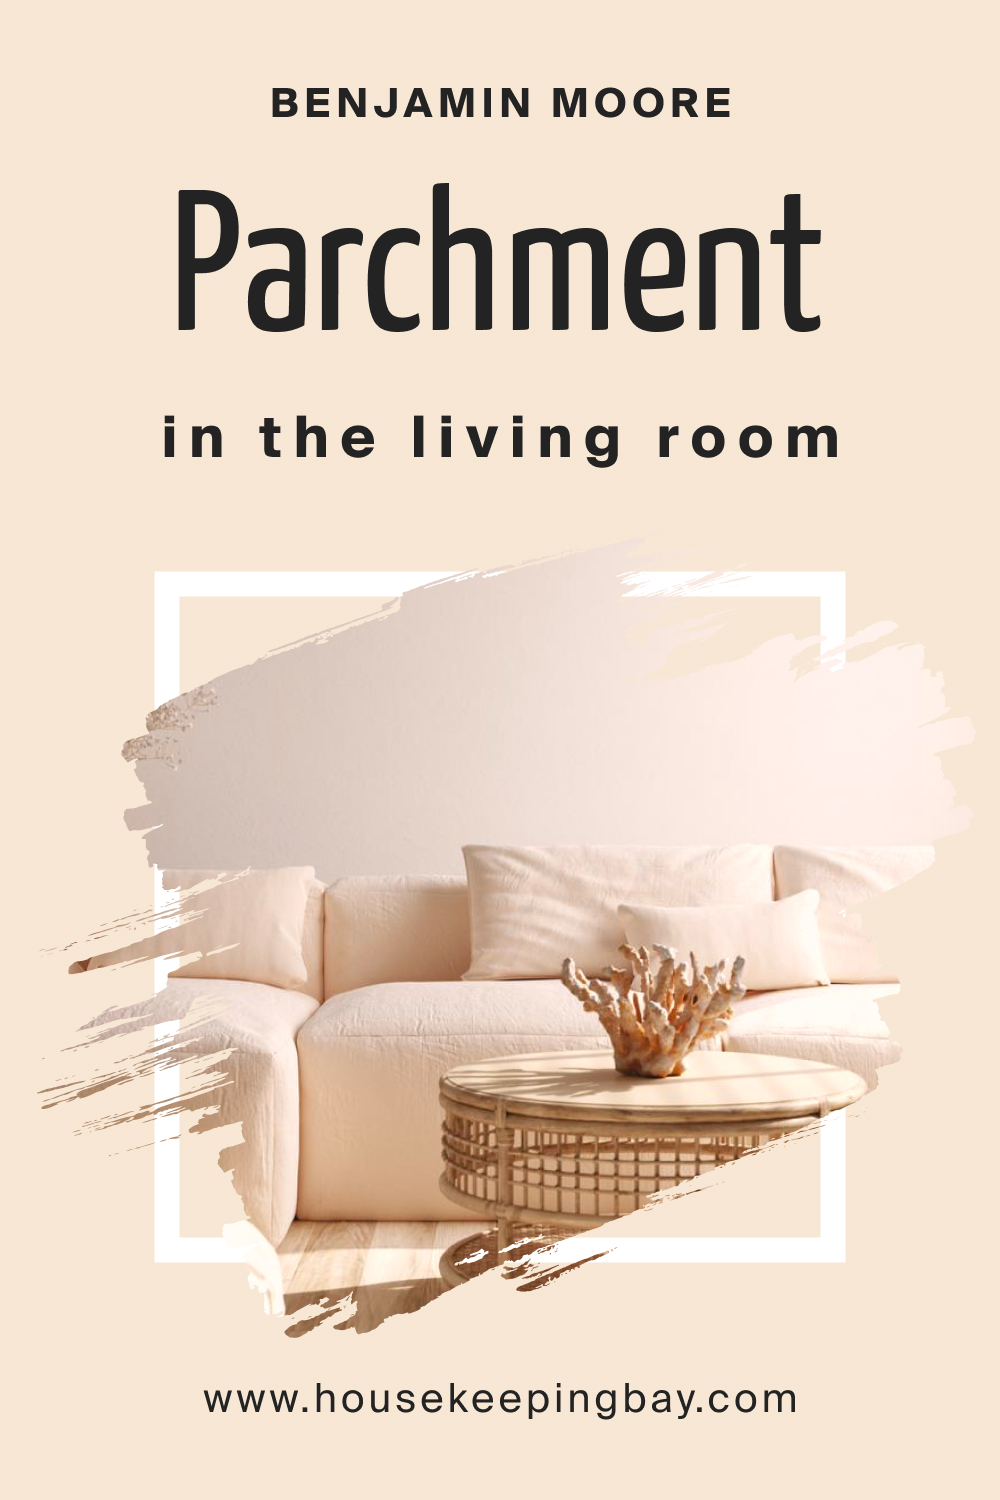 Benjamin Moore. Parchment OC 78 in the Living Room